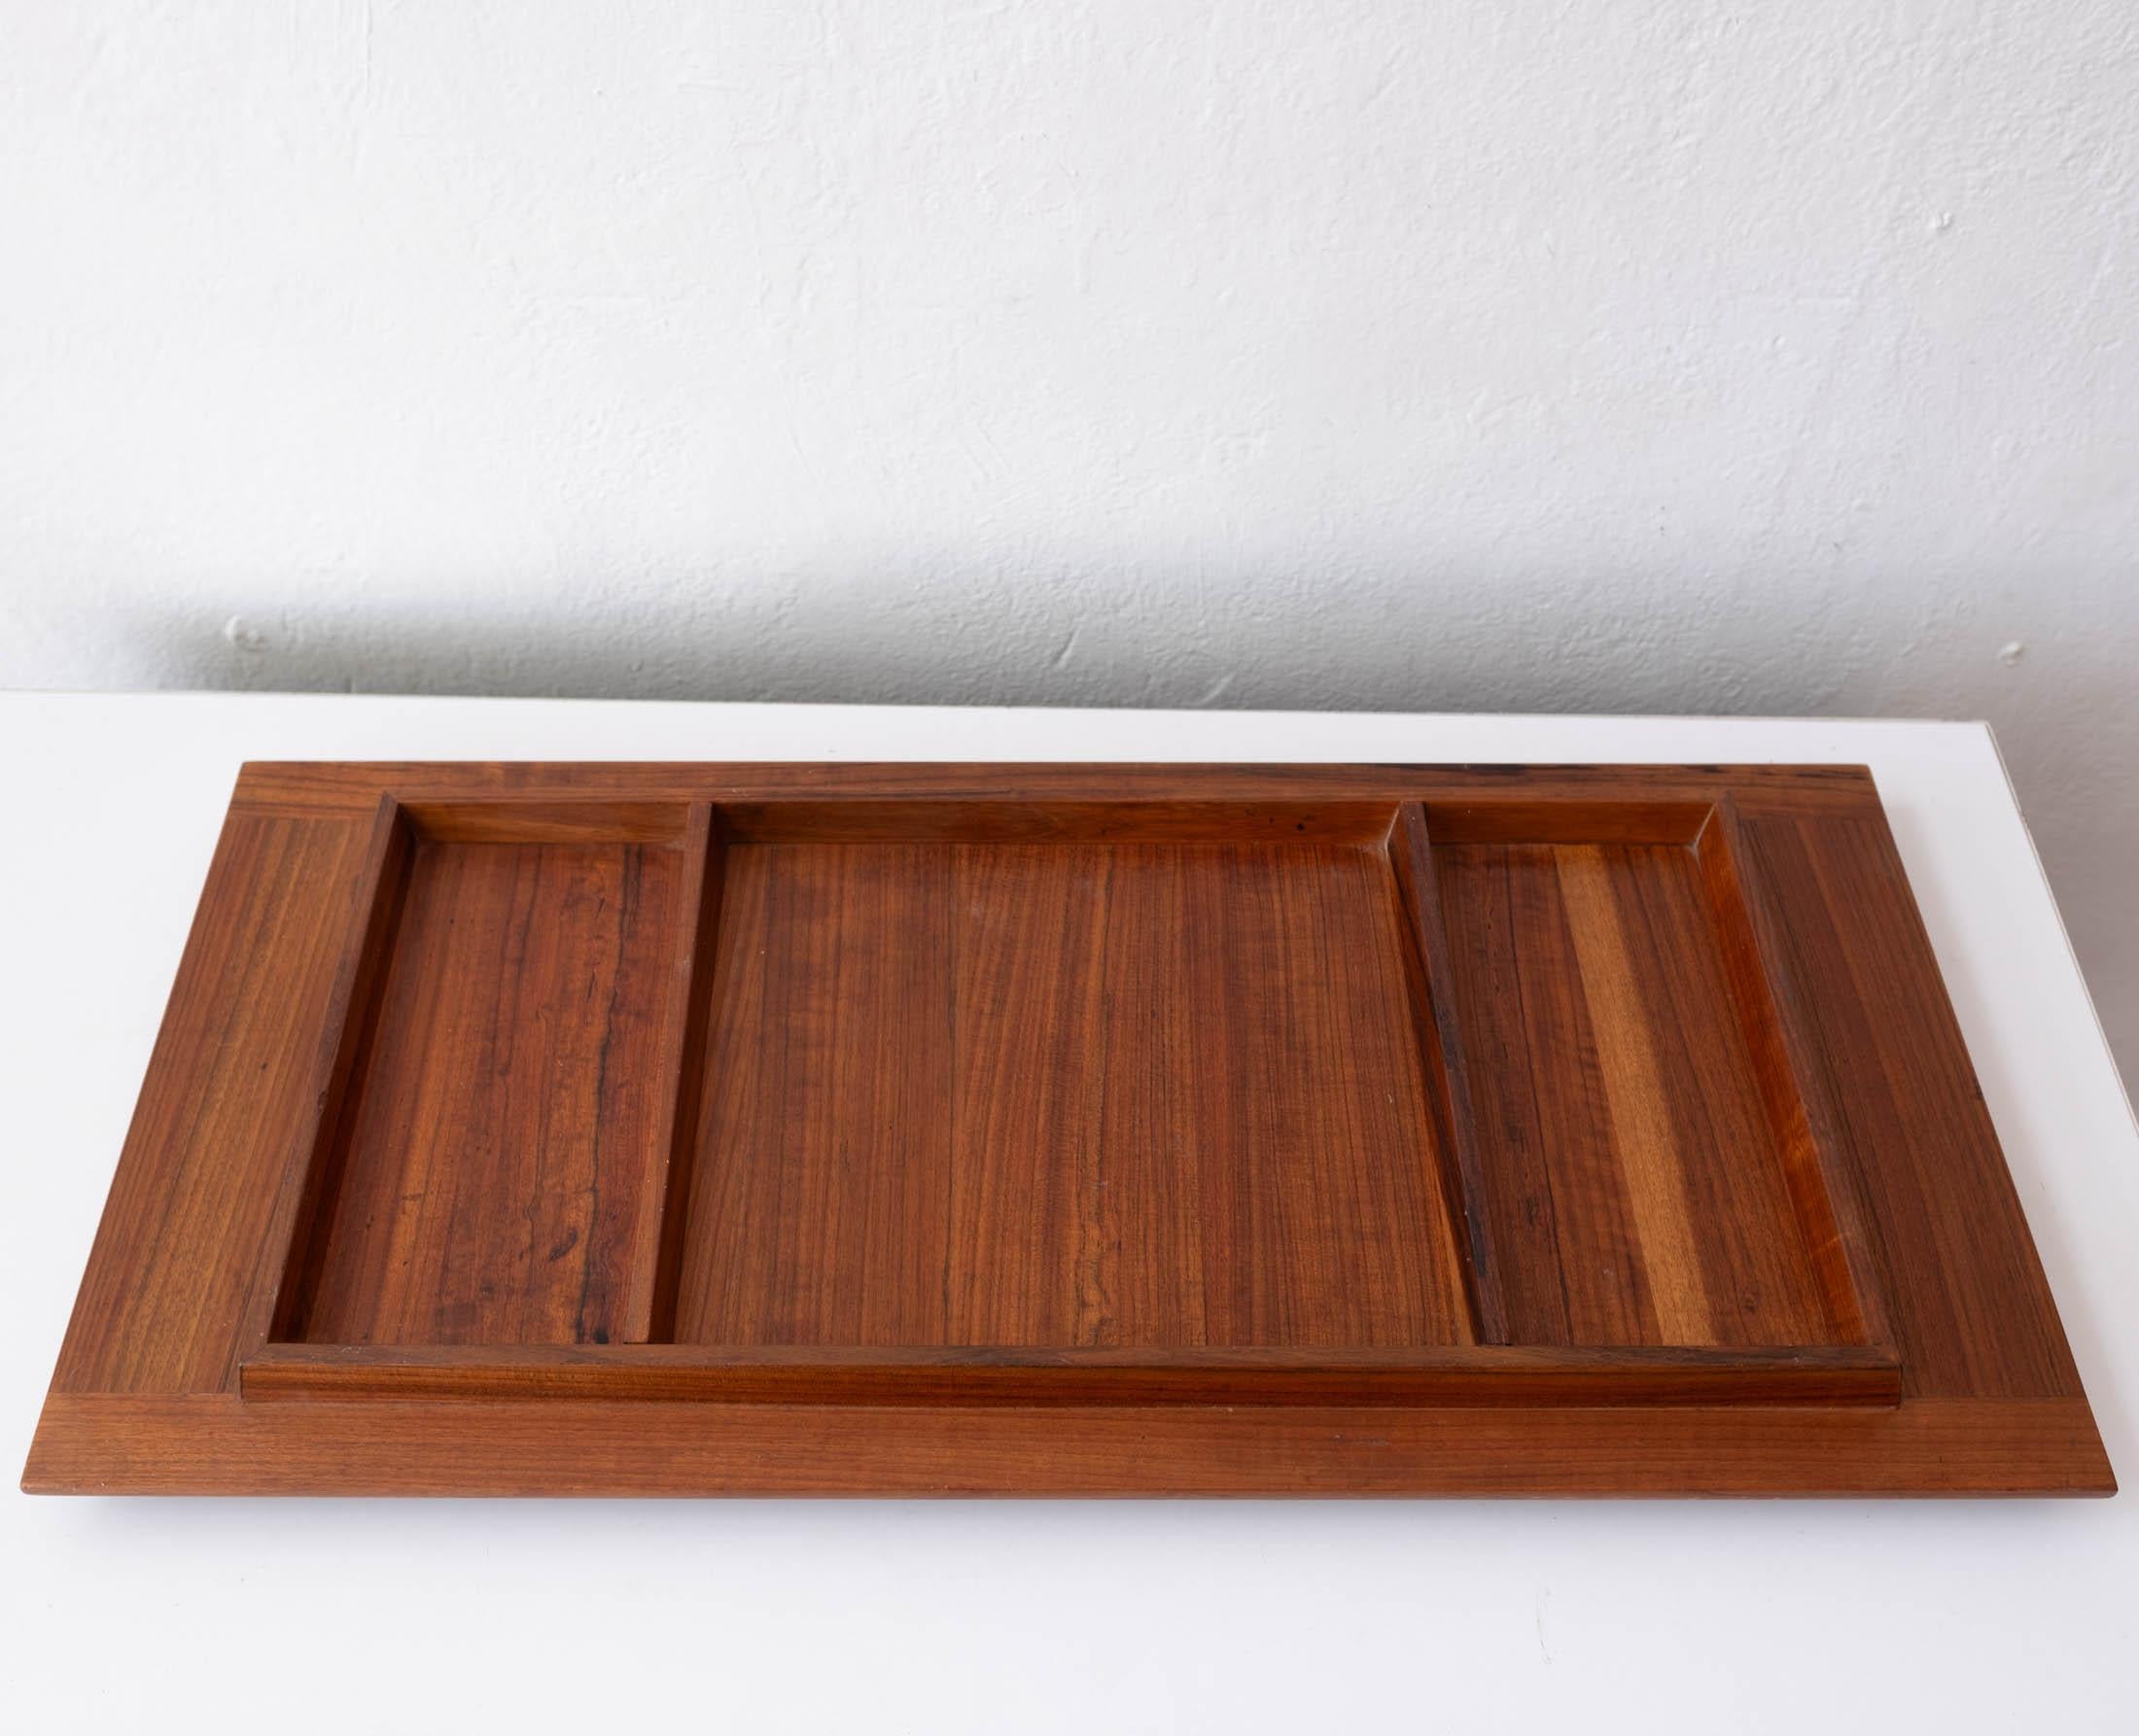 Dual sided tray designed by Jens Quistgaard for Dansk. Constructed of teak with a butcher block section and other divided sections. 

Denmark, 1960s.